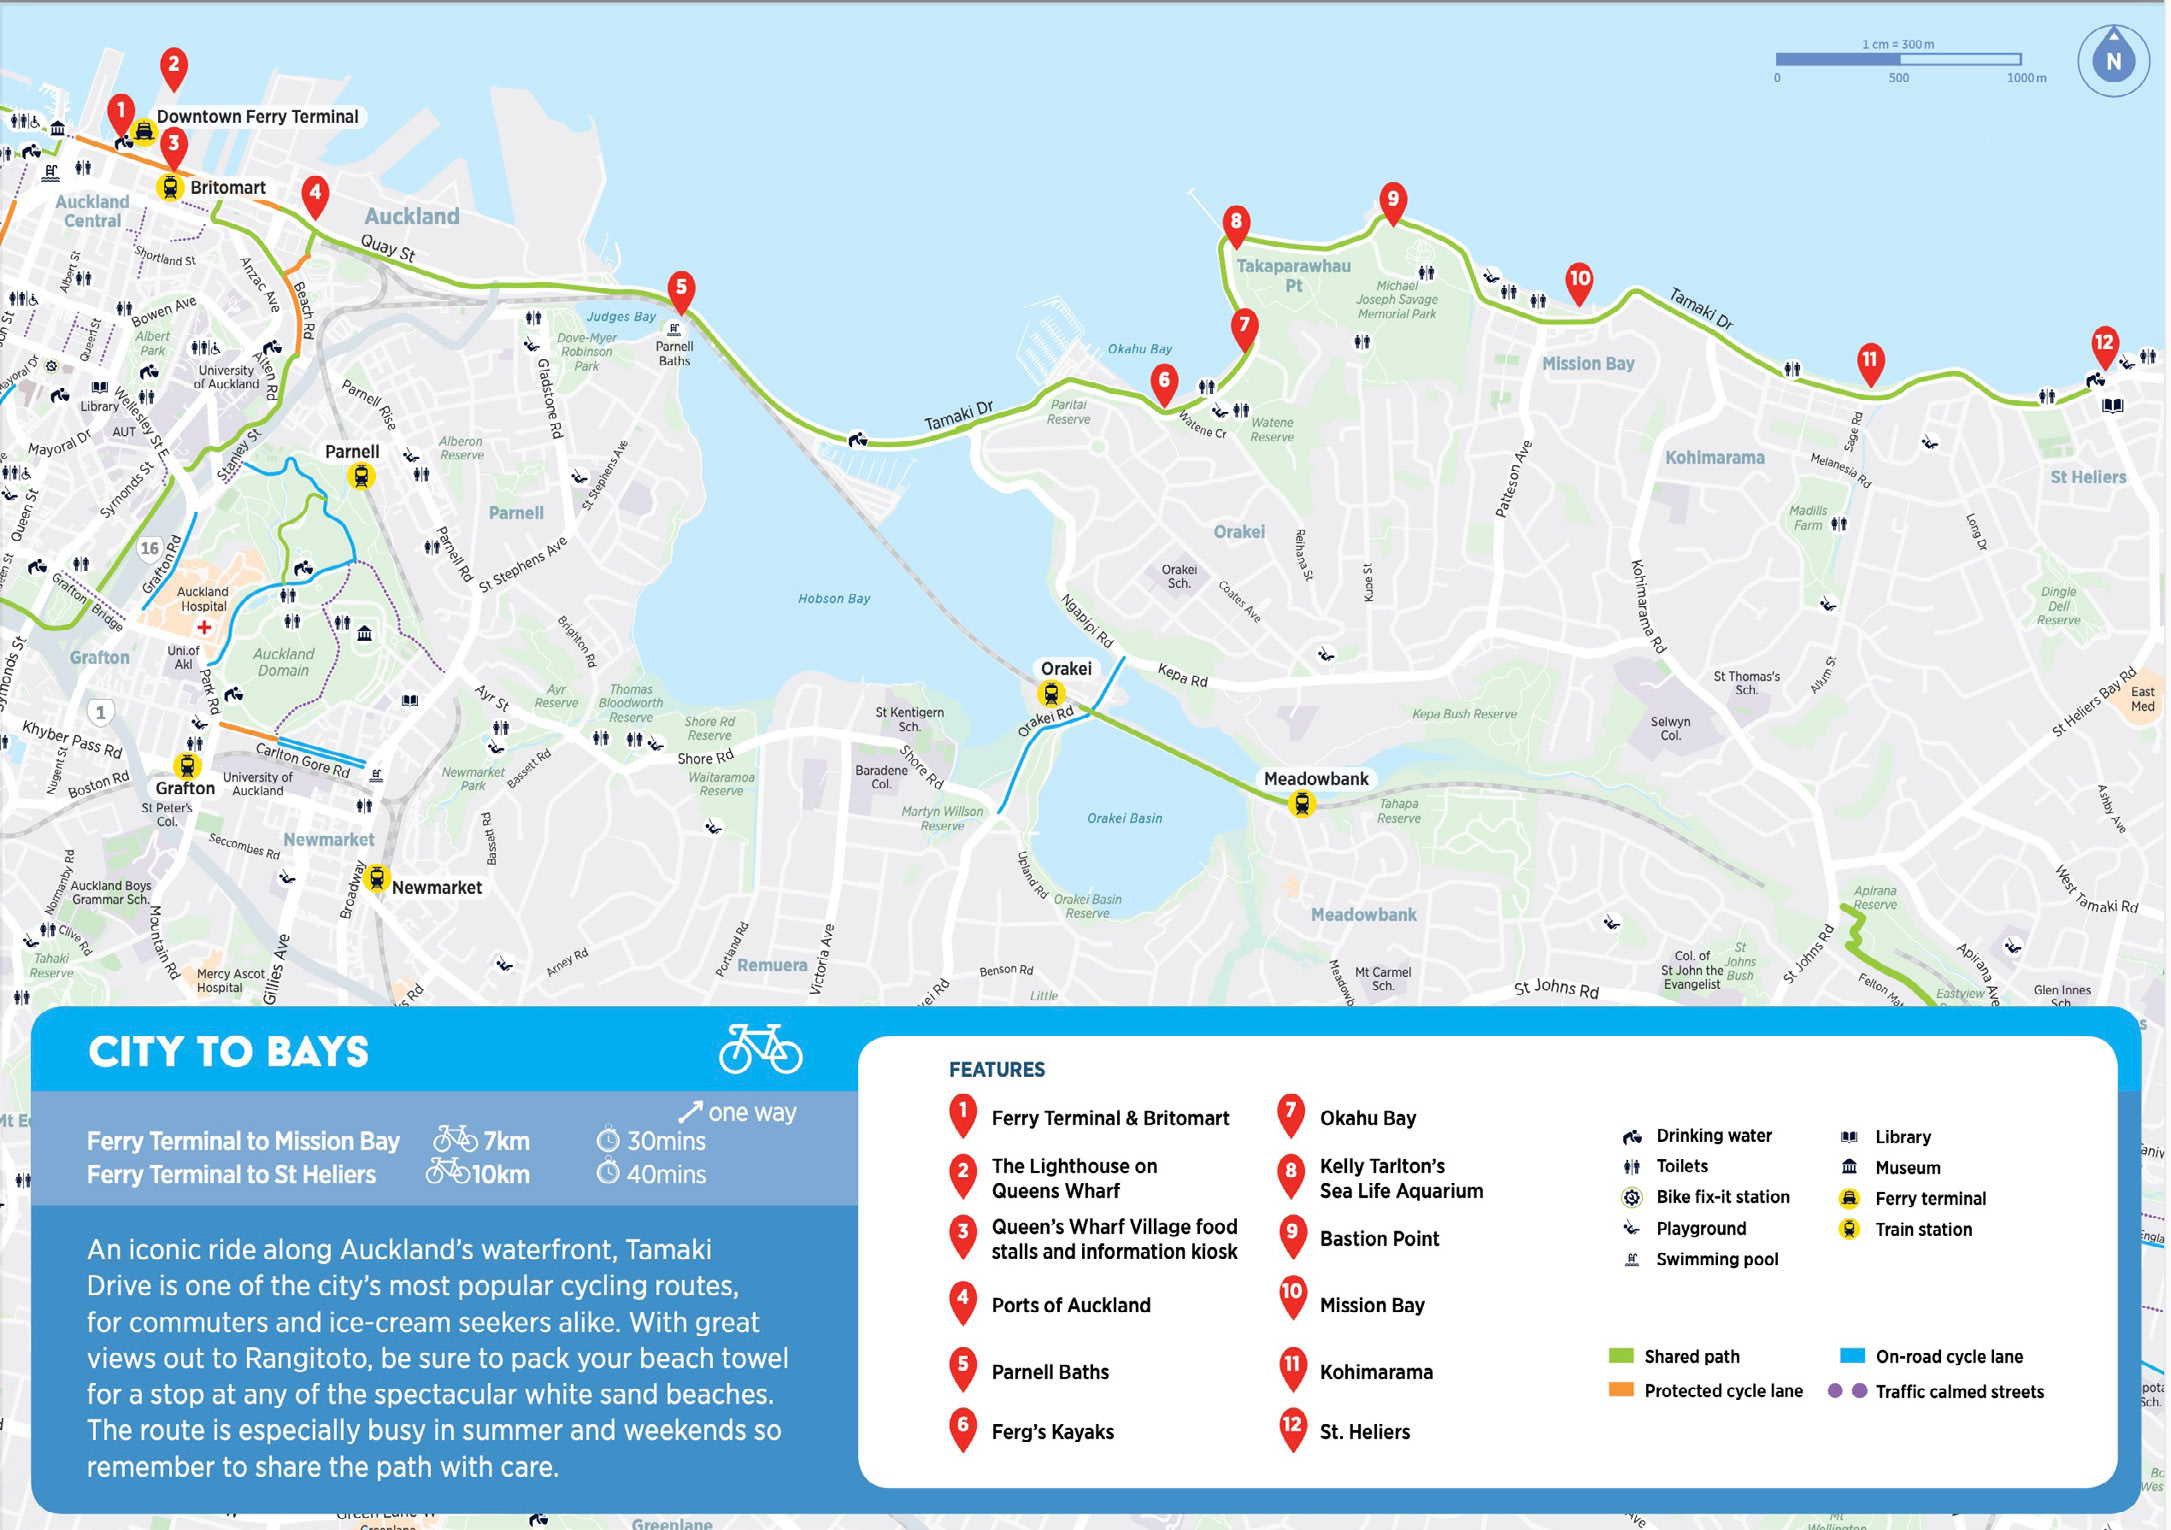 Auckland Transport's Map of the City To Bays via Tāmaki Drive ride route. Text reads:
An iconic ride along Auckland's waterfront, Tāmaki Drive is one of the city's most popular cycling routes, for commuters and ice-cream seekers alike. With great views out to Rangitoto, be sure to pack your beach towel for a stop at any of the spectacular white sand beaches. The route is especially busy in summer and weekends so remember to share the path with care. 